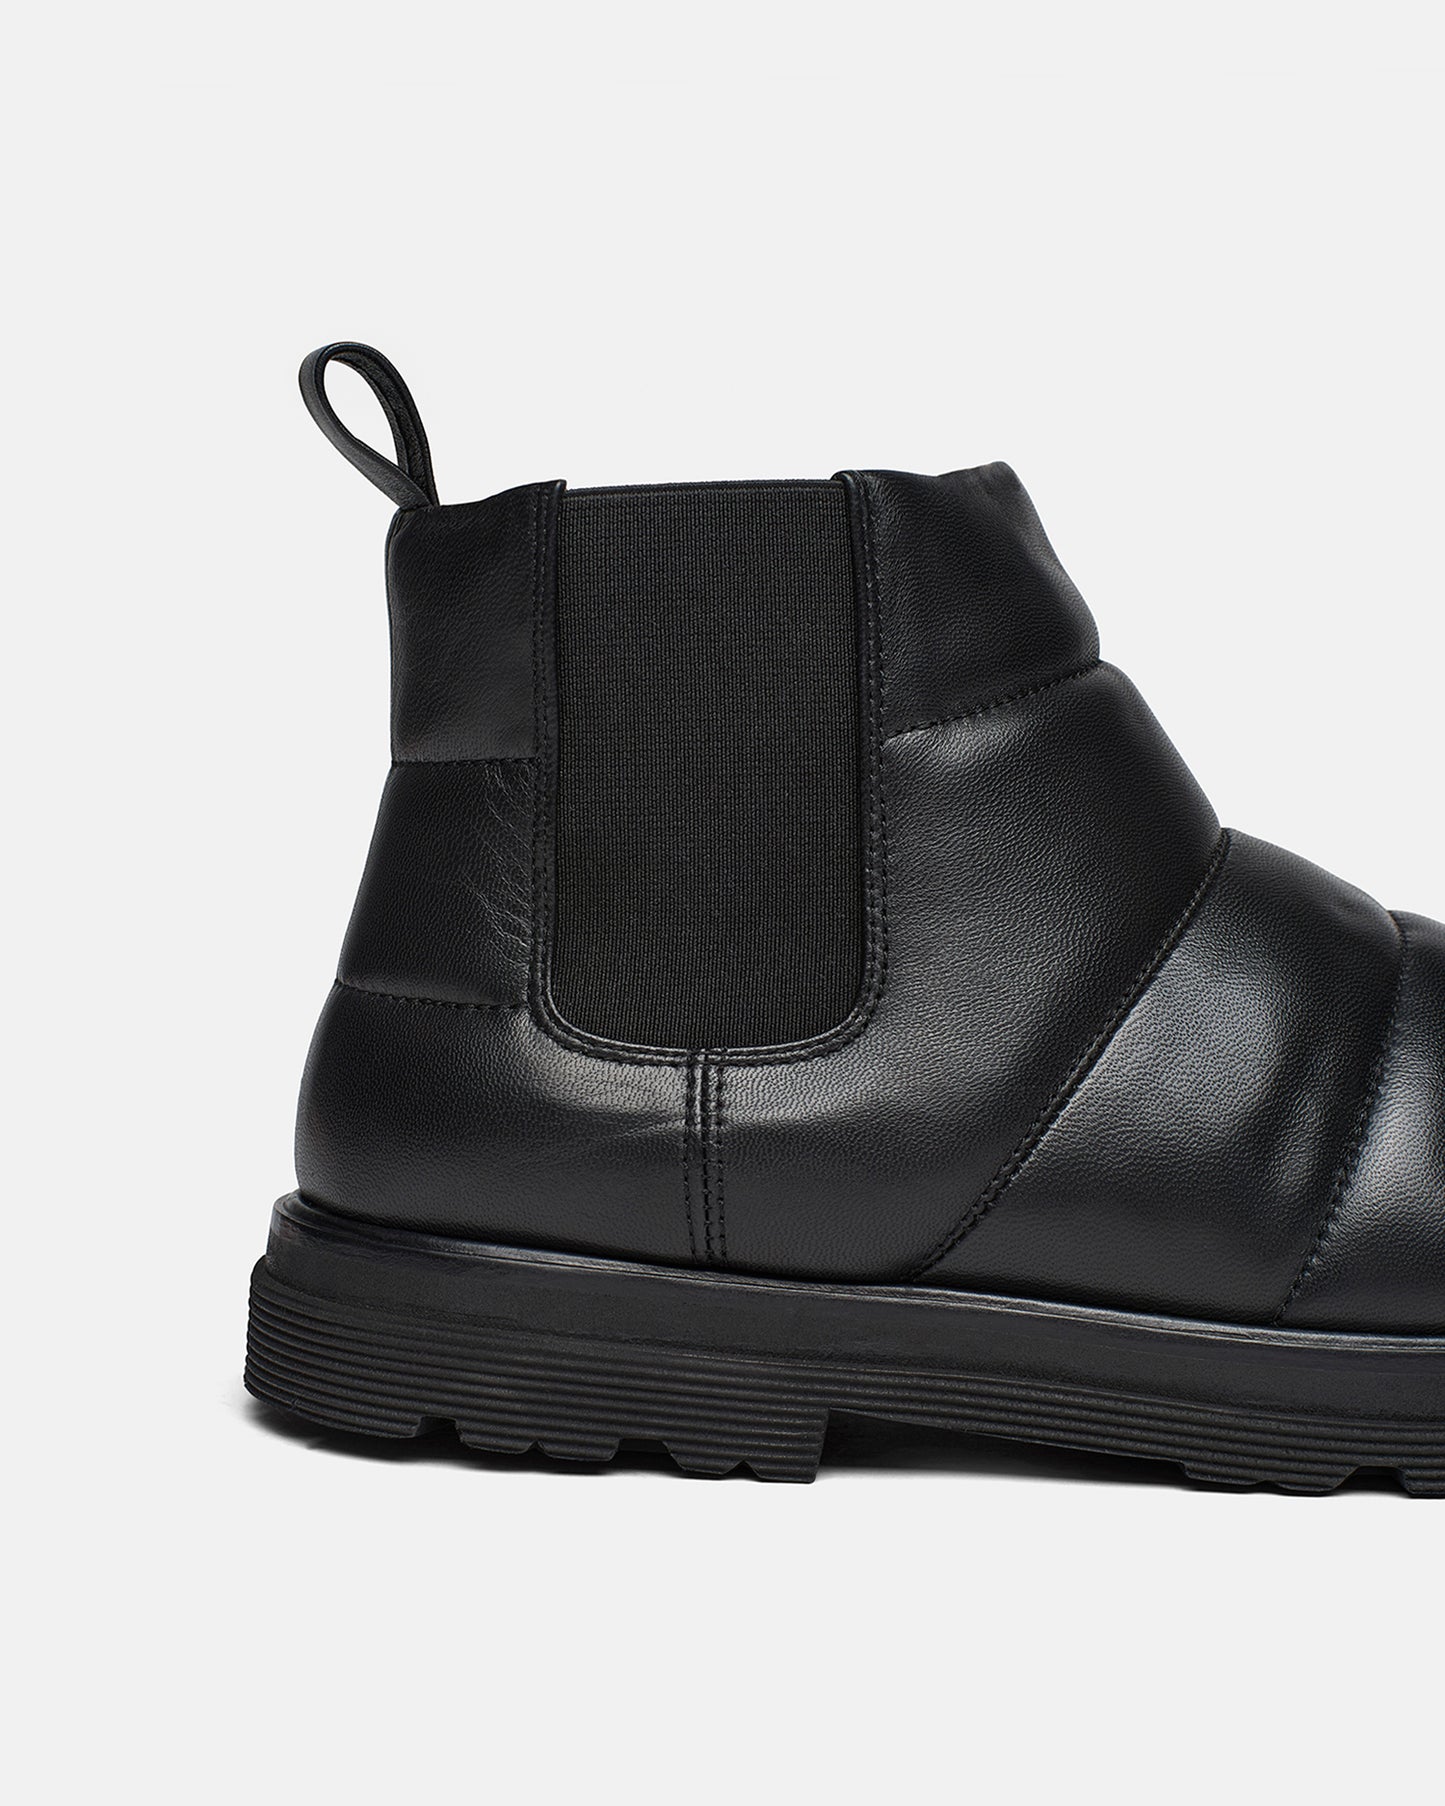 Bede - Rounded Toe Boot - Black